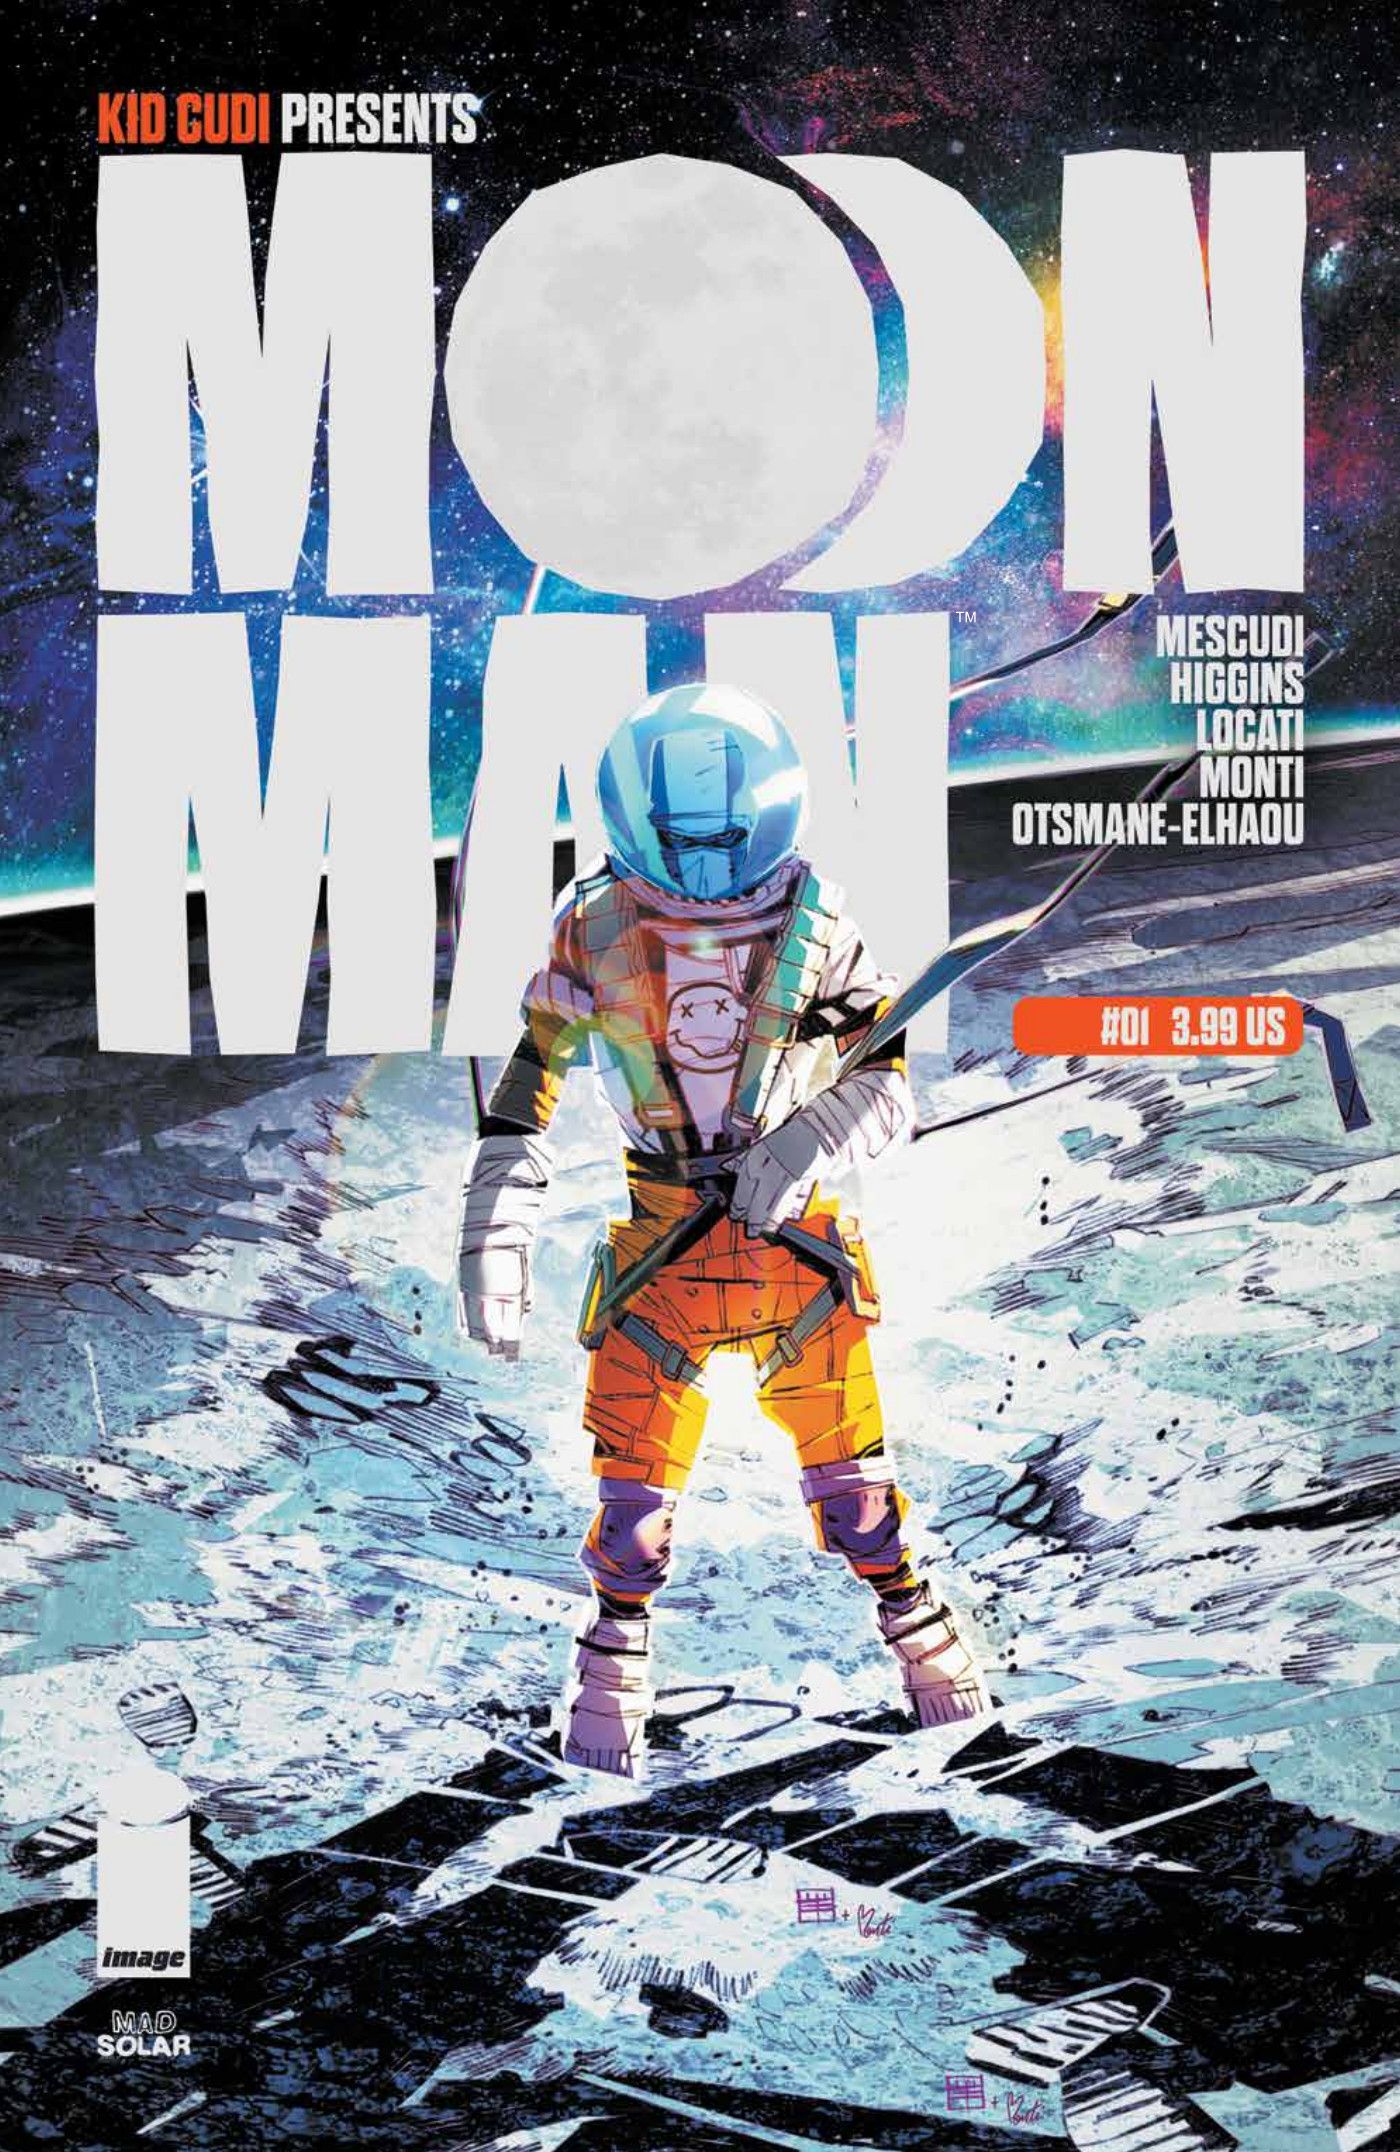 Moon Man #1 ACover by Marco Locati.